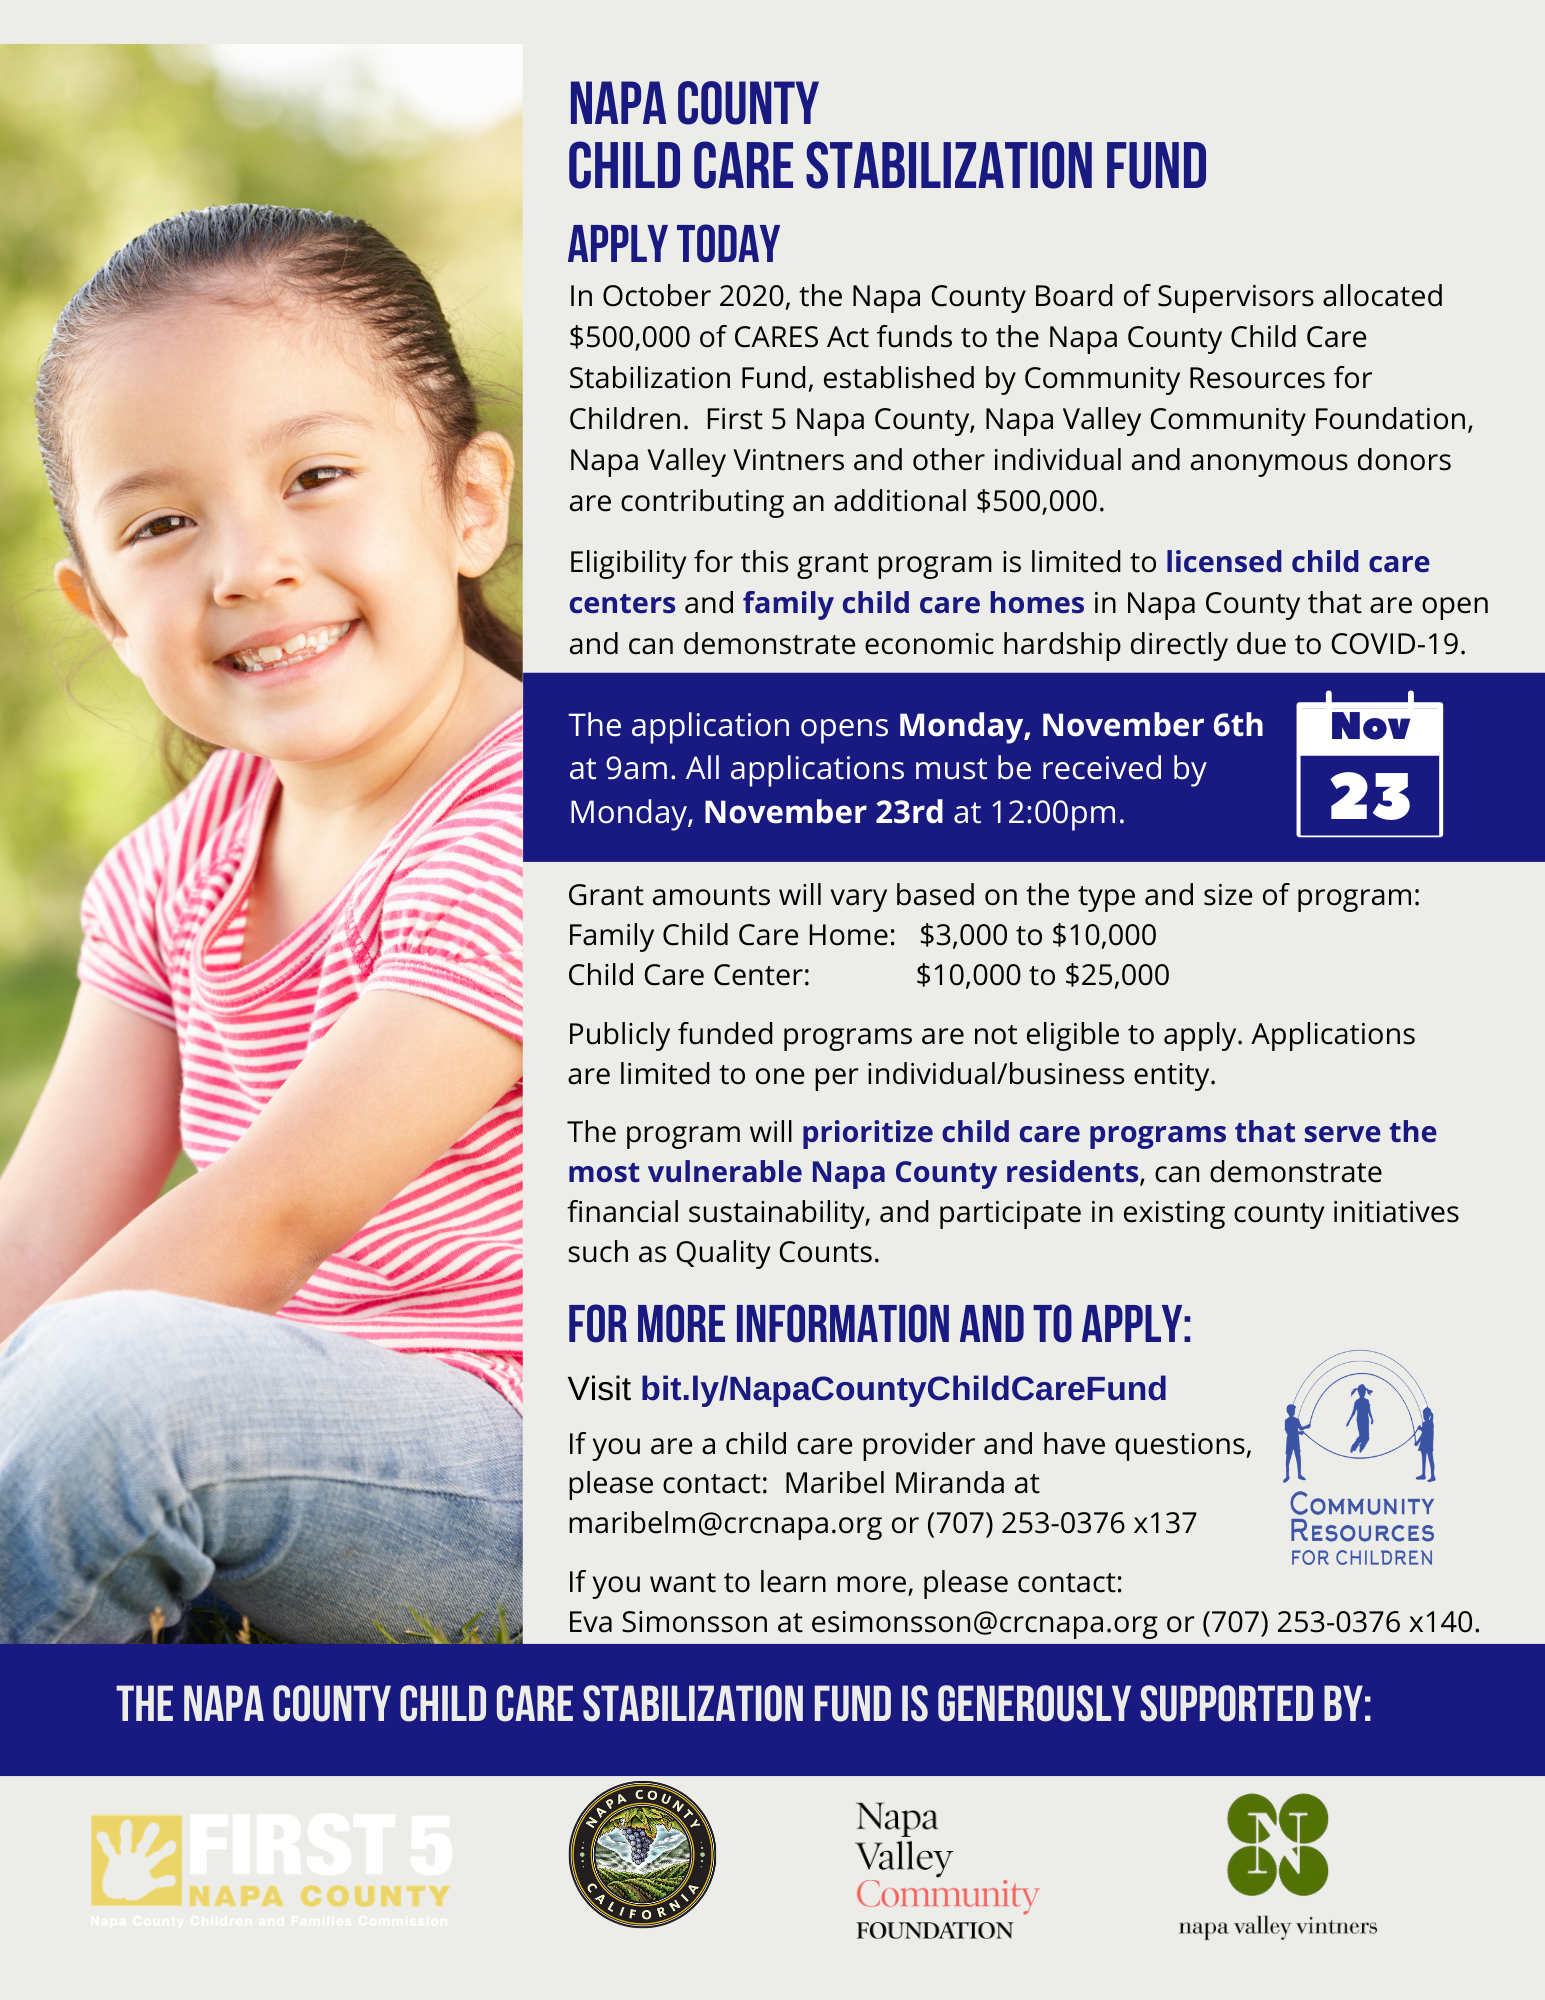 The Napa County Board of Supervisors has allocated funds to the Napa County Child Care Stabilization Fund to provide financial assistance to licensed child care centers and family child care homes in Napa County that have been affected by COVID-19. Full Text: NAPA COUNTY CHILD CARE STABILIZATION FUND APPLY TODAY In October 2020, the Napa County Board of Supervisors allocated $500,000 of CARES Act funds to the Napa County Child Care Stabilization Fund, established by Community Resources for Children. First 5 Napa County, Napa Valley Community Foundation, Napa Valley Vintners and other individual and anonymous donors are contributing an additional $500,000. Eligibility for this grant program is limited to licensed child care centers and family child care homes in Napa County that are open and can demonstrate economic hardship directly due to COVID-19. The application opens Monday, November 6th Nov at 9am. All applications must be received by Monday, November 23rd at 12:00pm. 23 Grant amounts will vary based on the type and size of program: Family Child Care Home: $3,000 to $10,000 Child Care Center: $10,000 to $25,000 Publicly funded programs are not eligible to apply. Applications are limited to one per individual/business entity. The program will prioritize child care programs that serve the most vulnerable Napa County residents, can demonstrate financial sustainability, and participate in existing county initiatives such as Quality Counts. FOR MORE INFORMATION AND TO APPLY: Visit bit.ly/NapaCountyChildCareFund If you are a child care provider and have questions, please contact: Maribel Miranda at maribelm@crcnapa.org or (707) 253-0376 x137 COMMUNITY RESOURCES If you want to learn more, please contact: FOR CHILDREN Eva Simonsson at esimonsson@crcnapa.org or (707) 253-0376 x140. THE NAPA COUNTY CHILD CARE STABILIZATION FUND IS GENEROUSLY SUPPORTED BY: COUNTY FIRST 5 NAPA C Napa Valley NAPA COUNTY CALITO Community Nine County Children and Fumilliat Commission FOUNDATION napa valley vintners